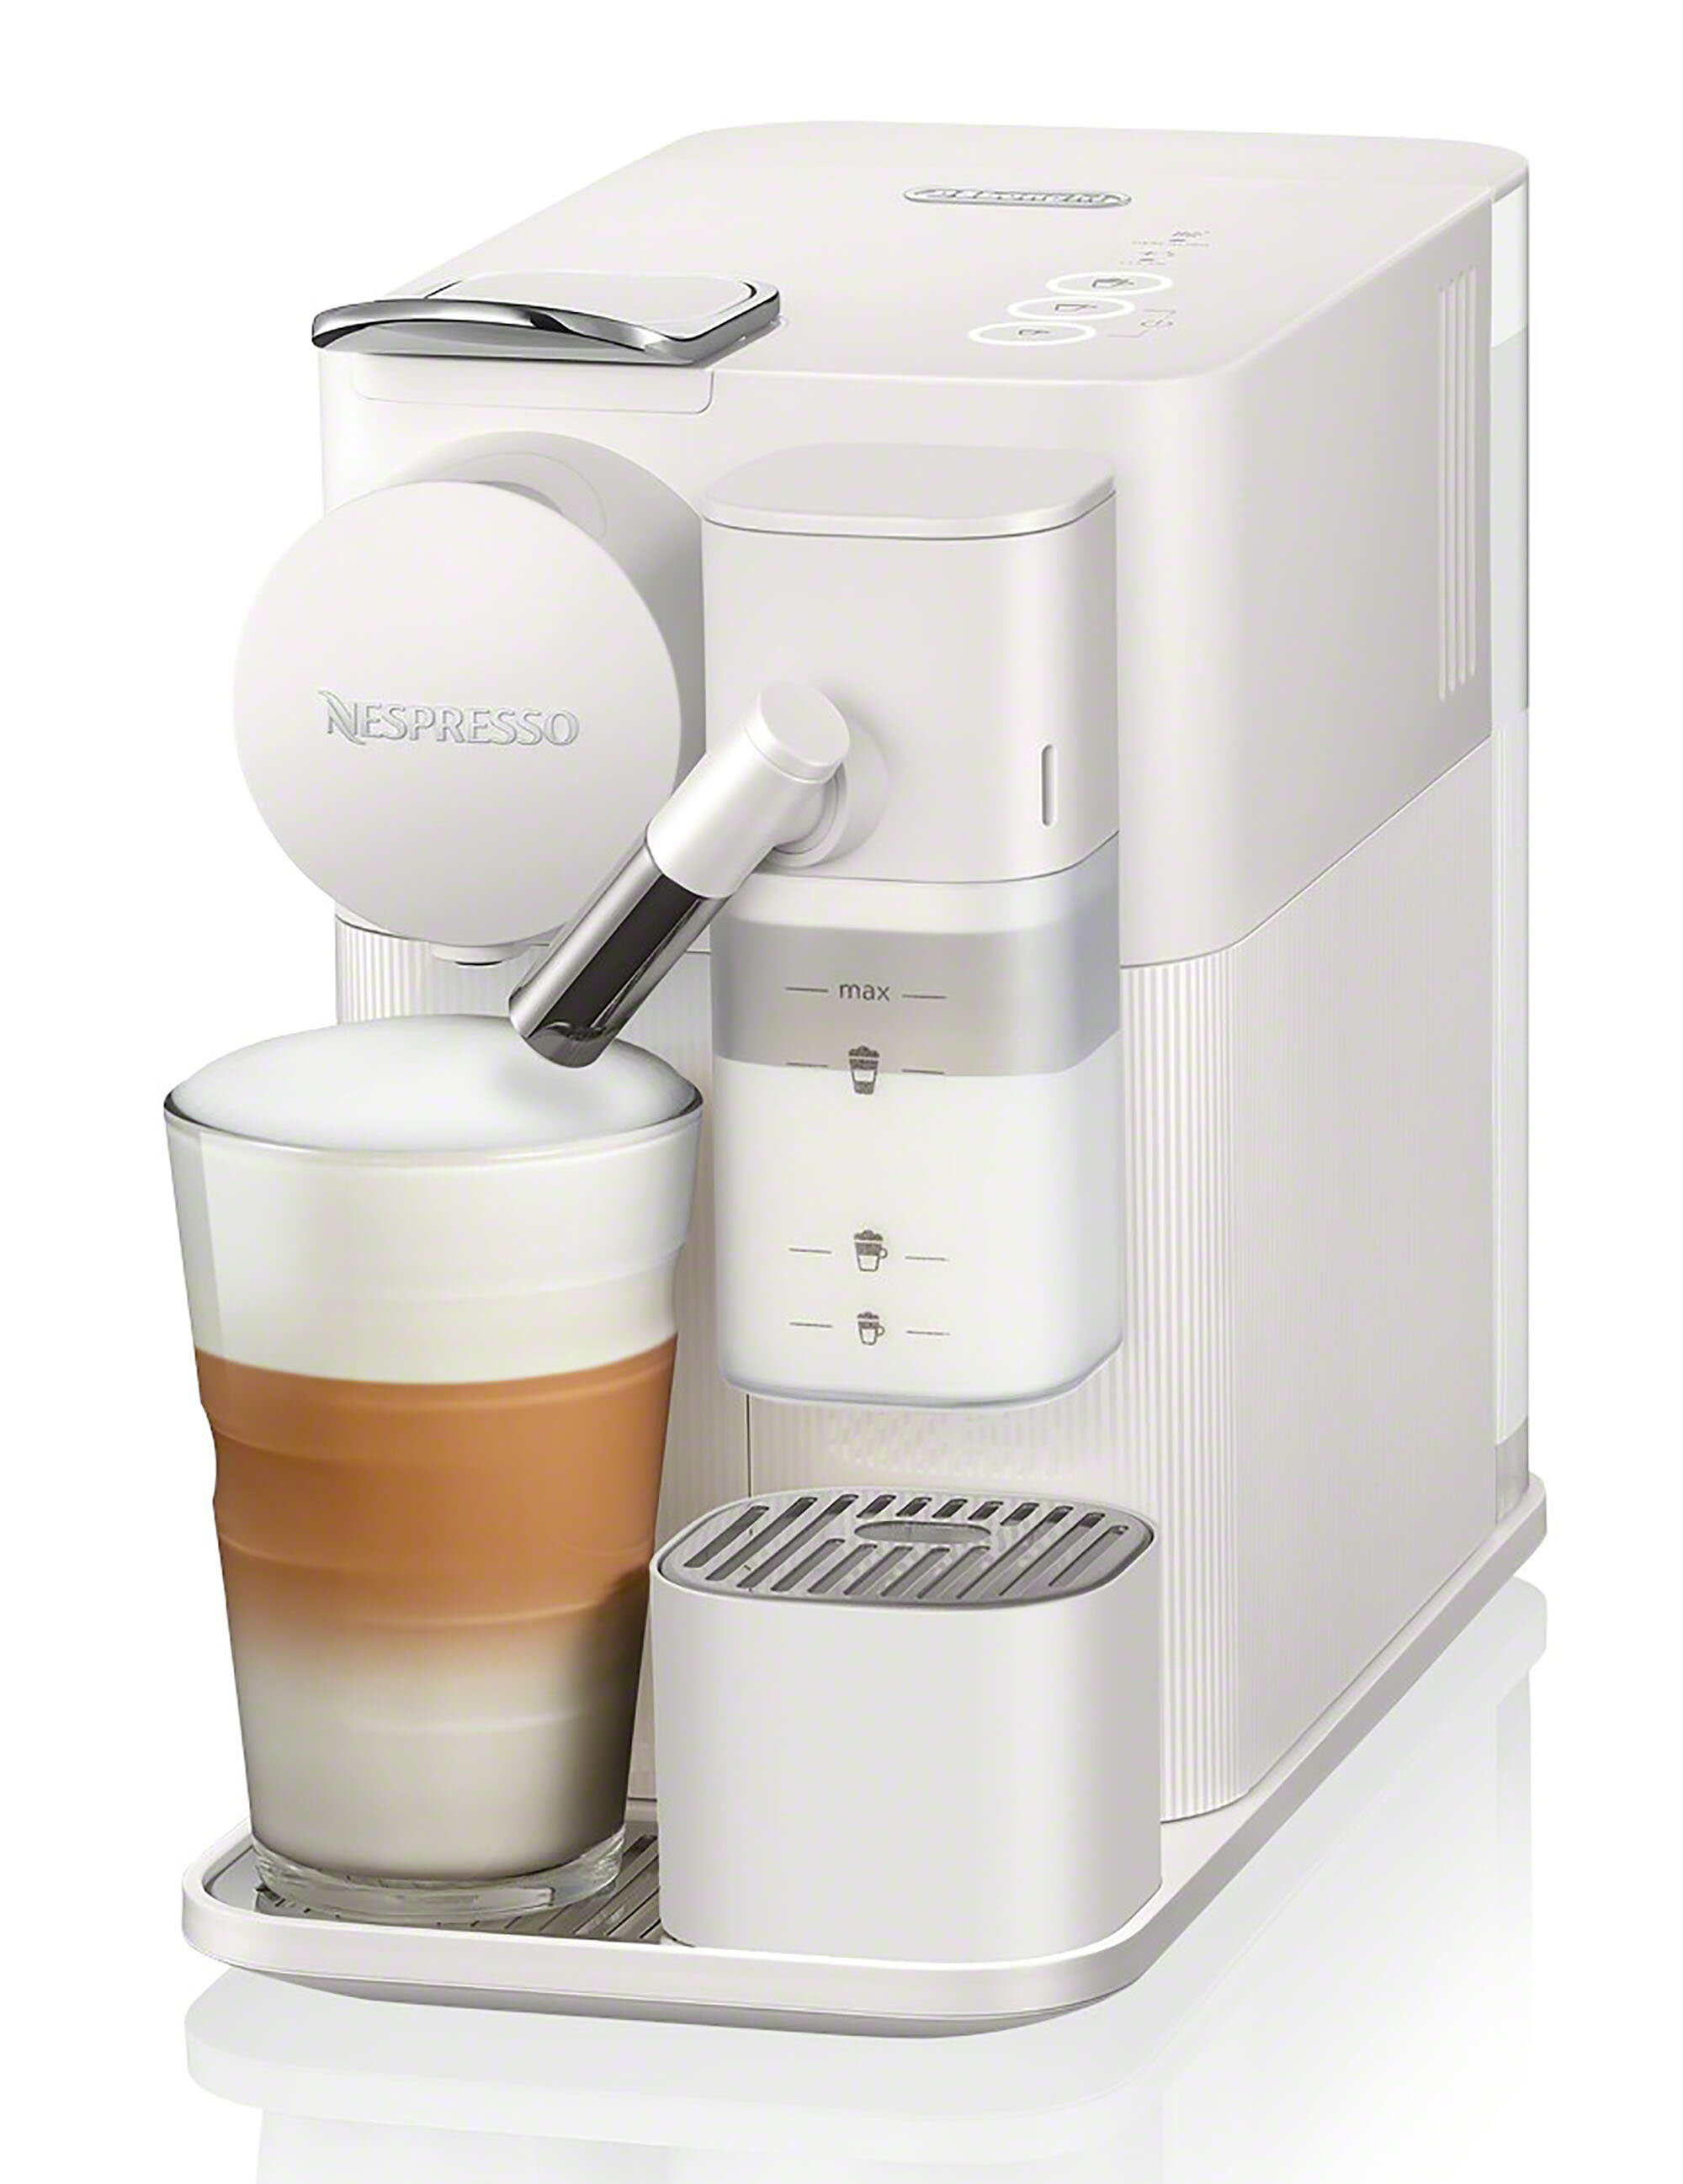 Nespresso Lattissima Touch Espresso Machine with Milk Frother by De'Longhi,  Washed Black